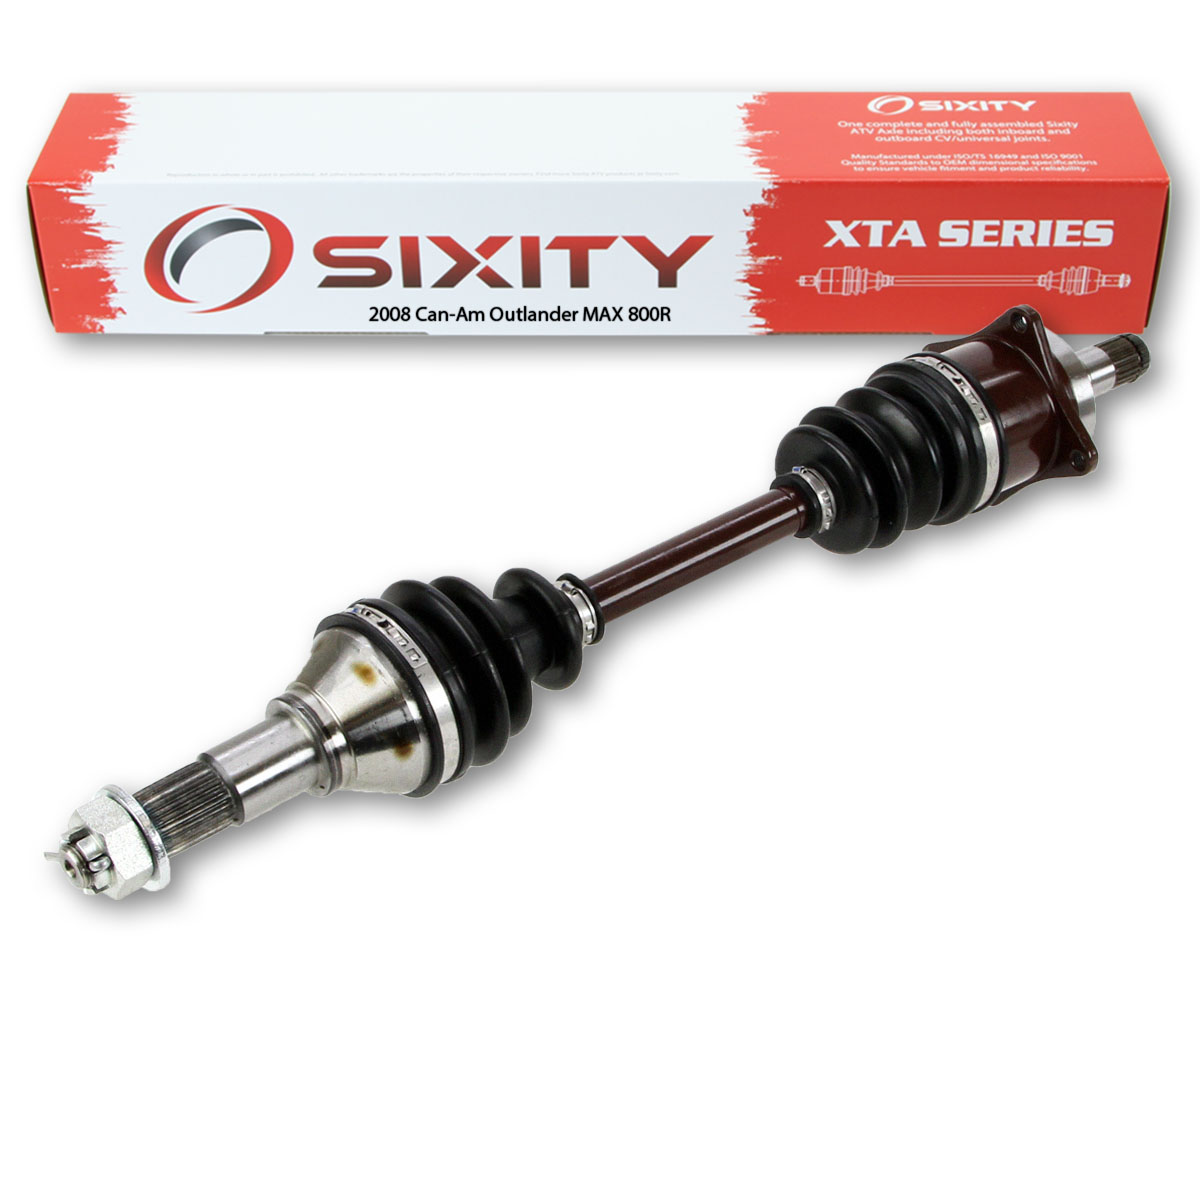 Sixity 2008 Can-Am Outlander MAX 800R 4X4 Front Left XTA ATV Axle